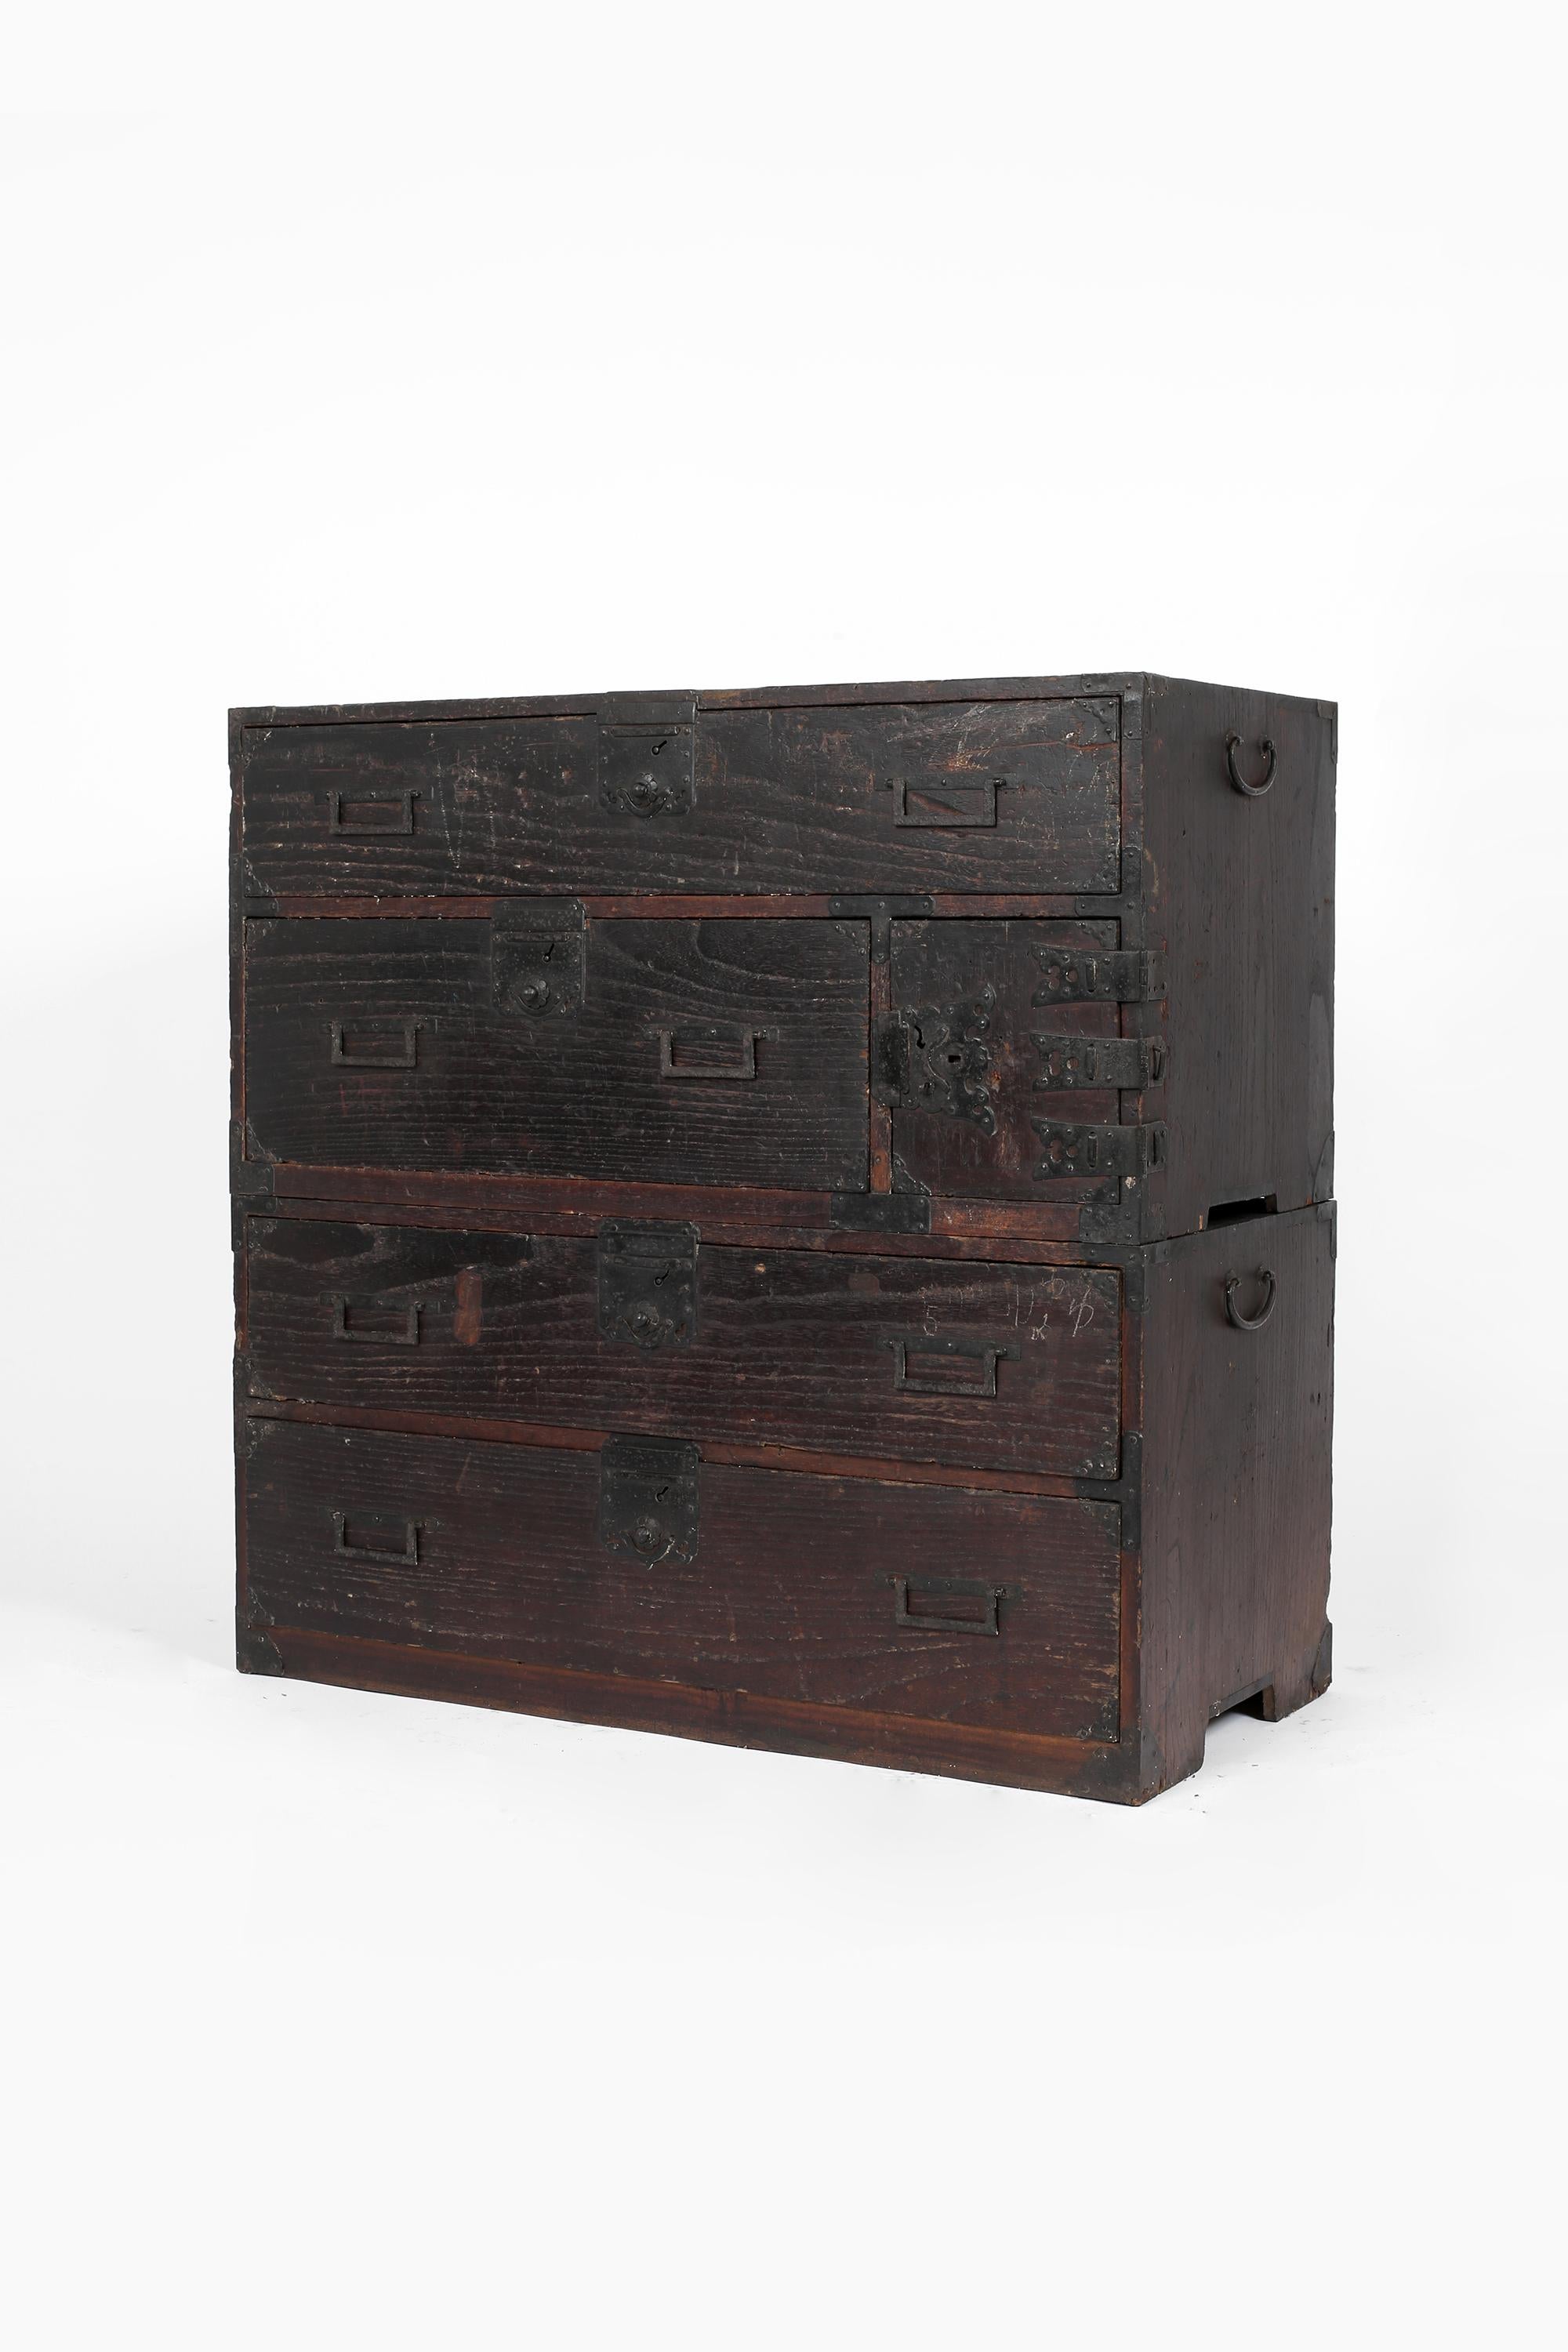 An Edo period Tansu chest, constructed from dark heavily patinated cedar with decorative forged iron hardware. The right hand door opens to reveal an internal drawer and hidden secret compartment. Japanese, c. 1840.